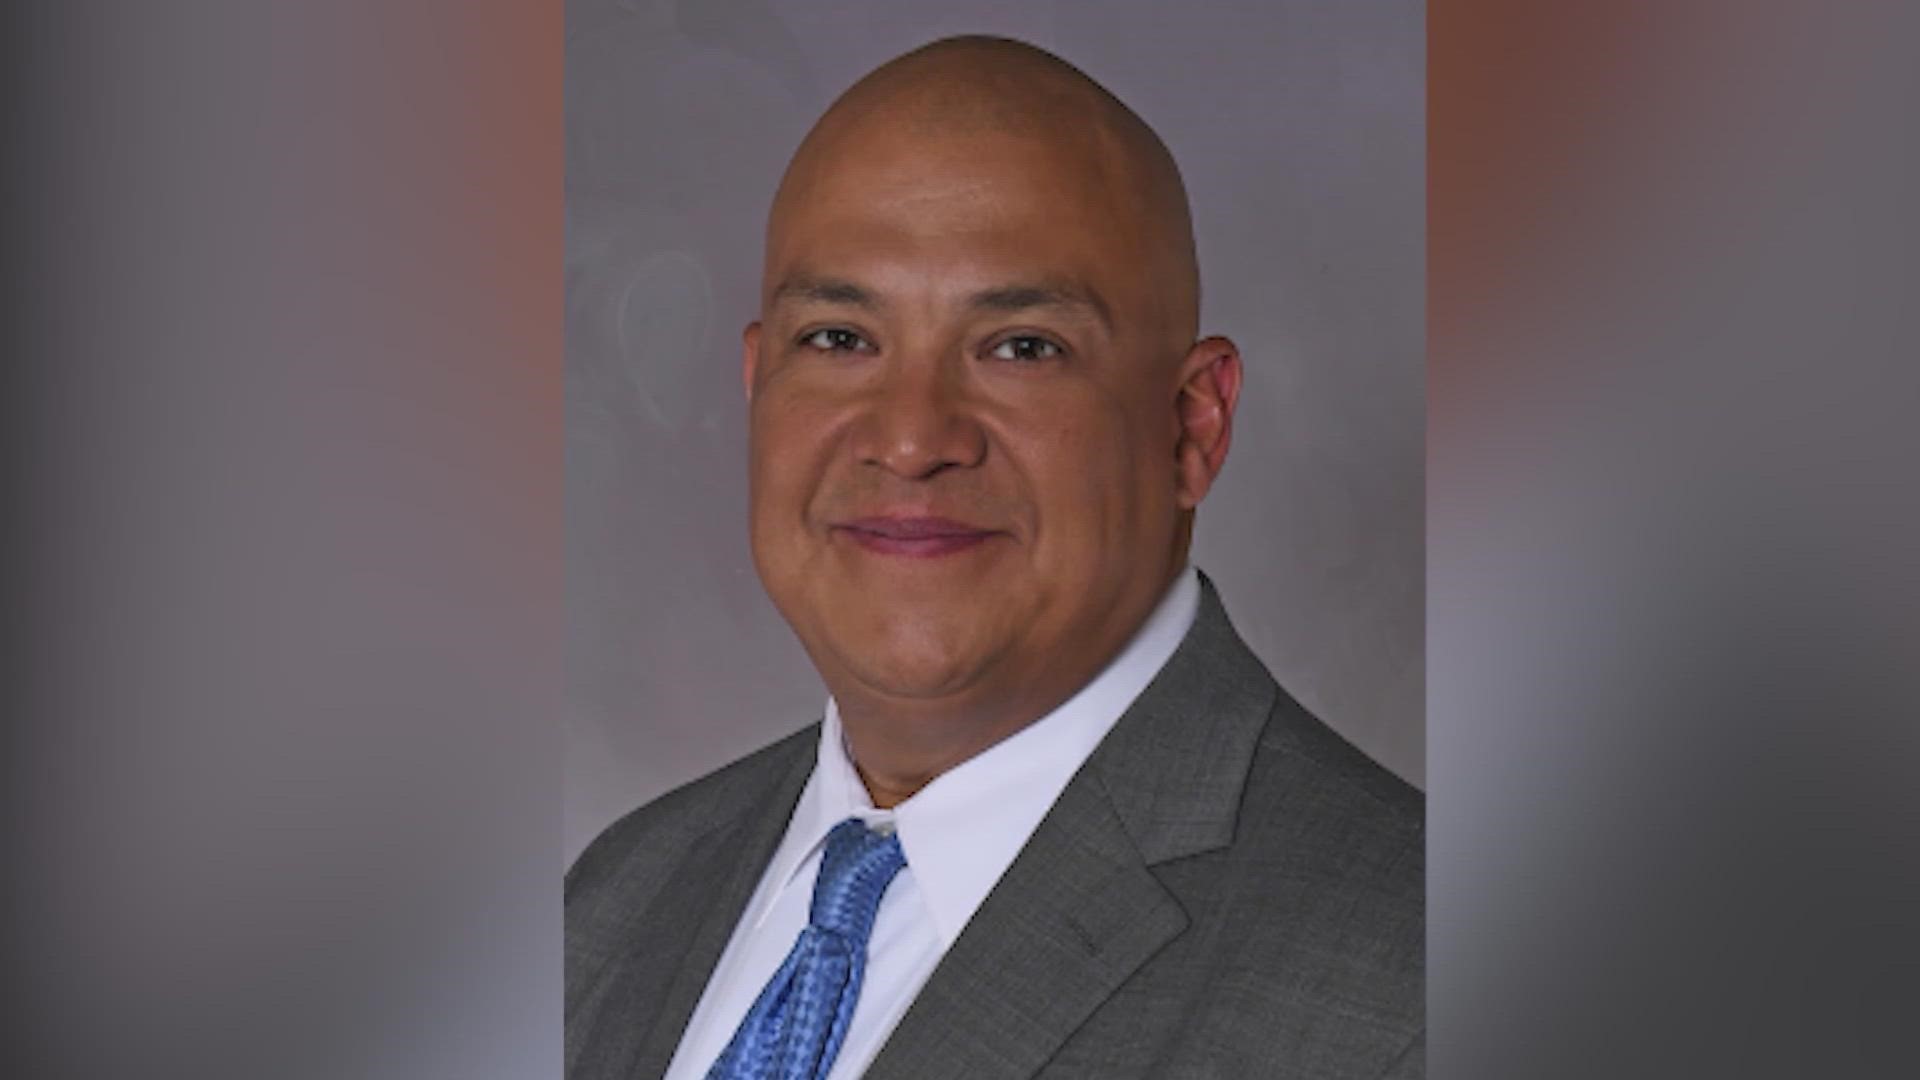 Arredondo won an appeal to upgrade his discharge status because the school district did not object, a Texas 2036 report says.